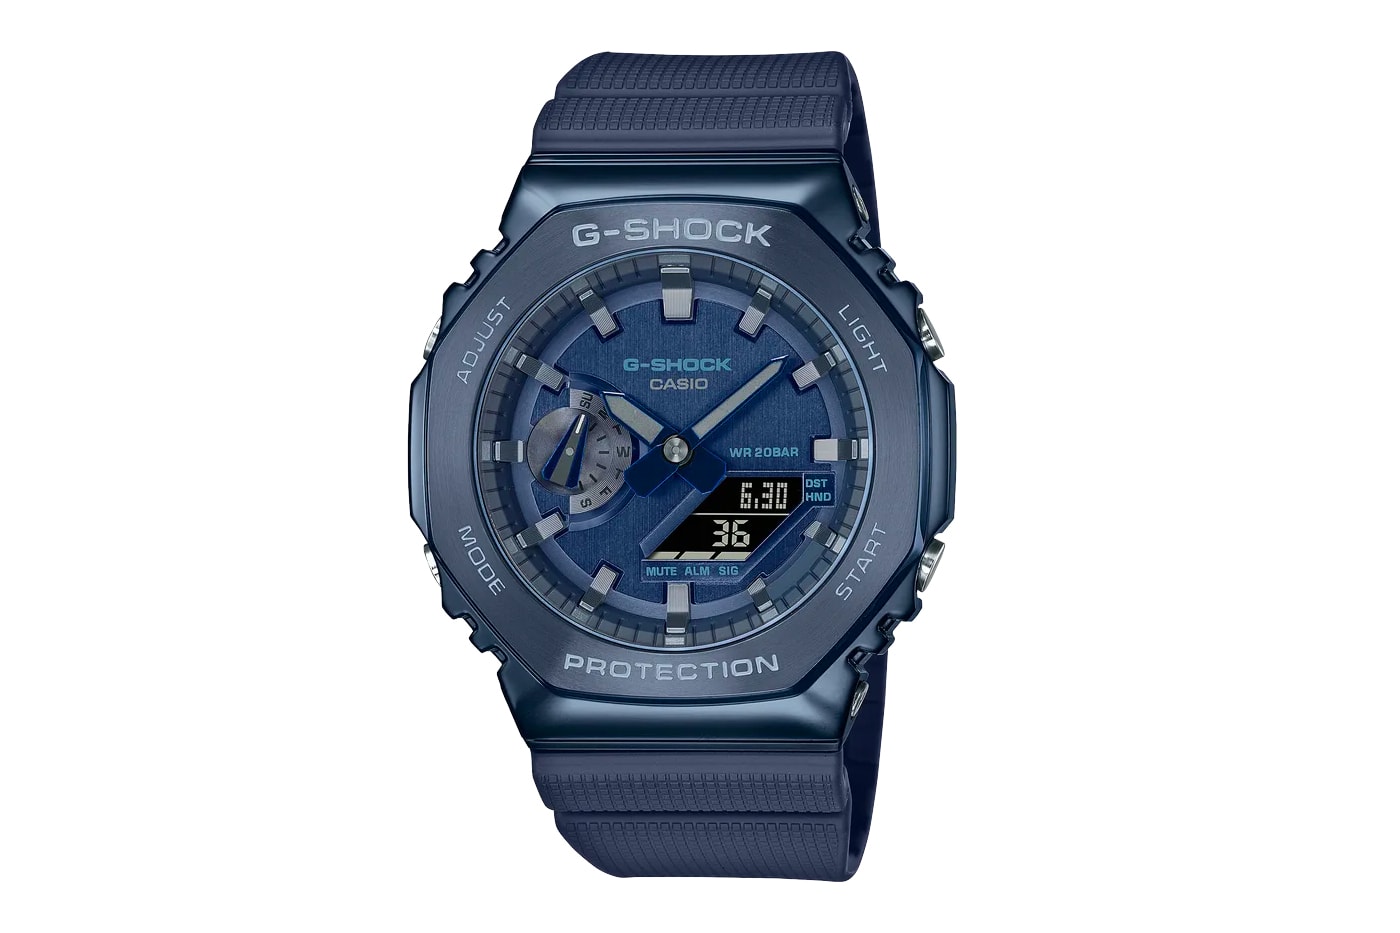 casio g-shock gm-2100 stainless steel casioak limited edition colors release info red olive green blue watches casioak analog digital 